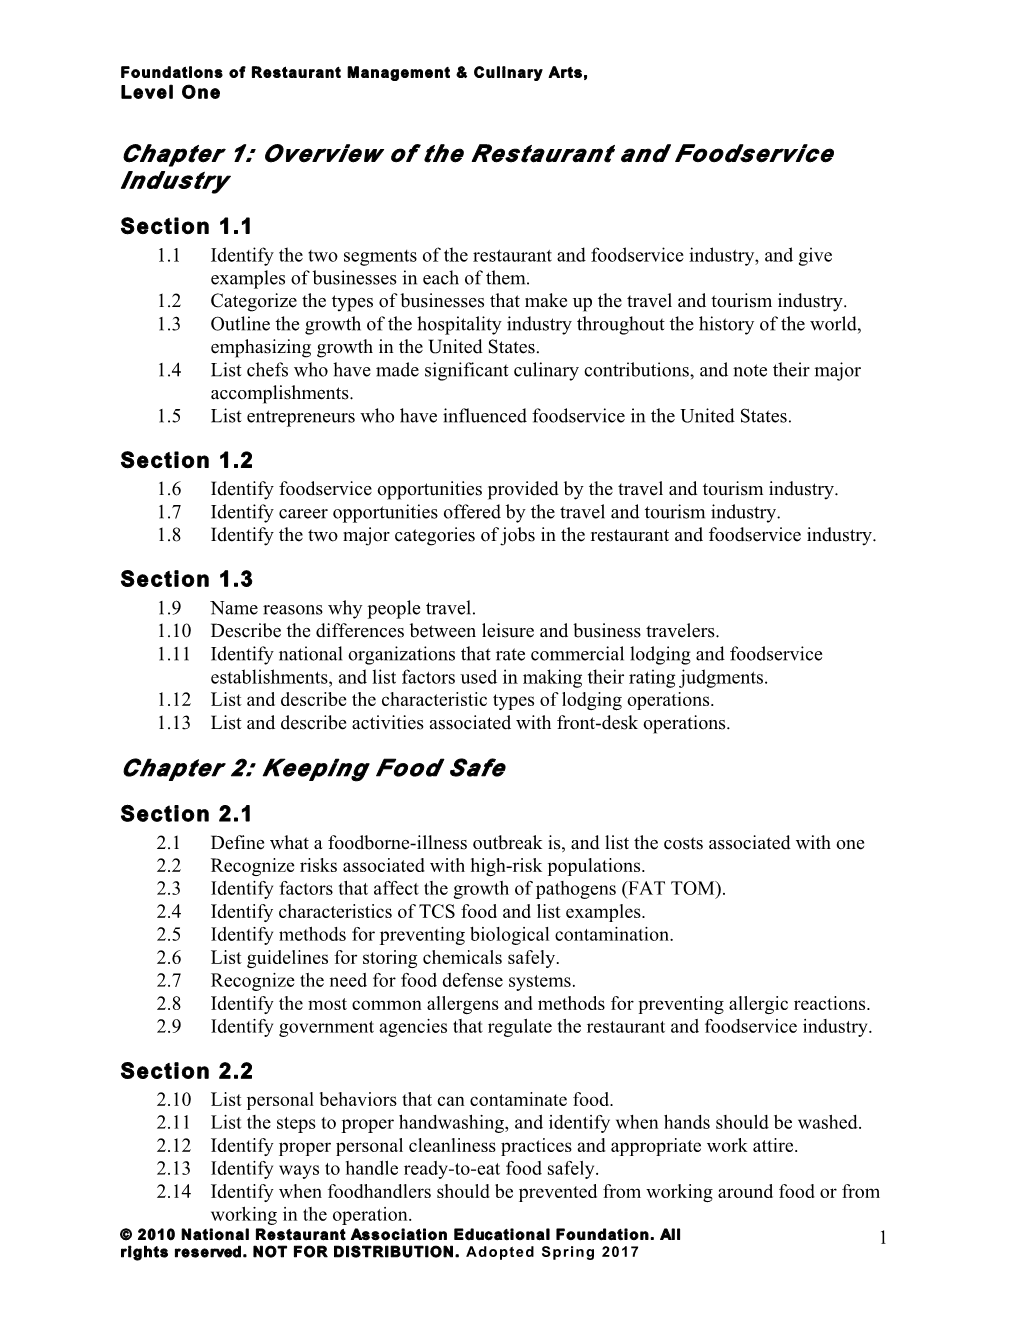 Overview of the Restaurant and Foodservice Industry Chapter 2